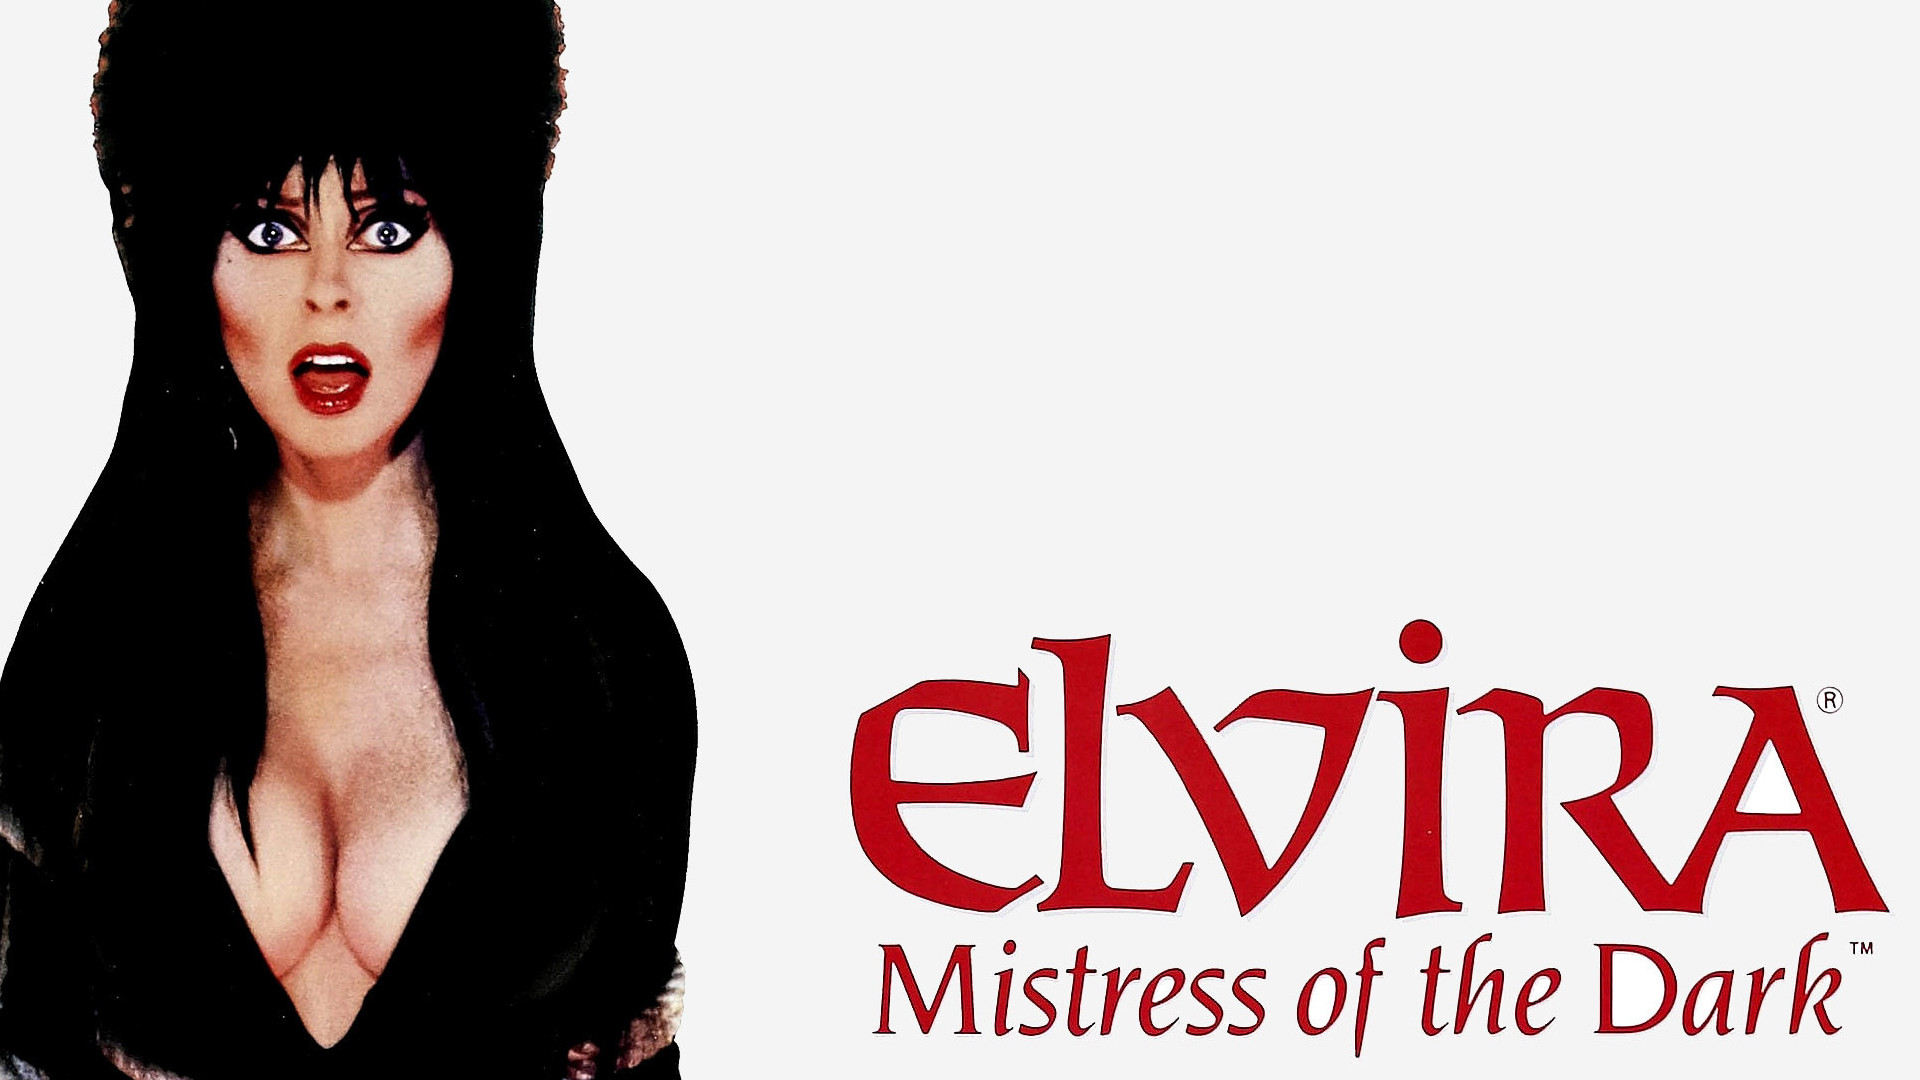 A picture of elvira